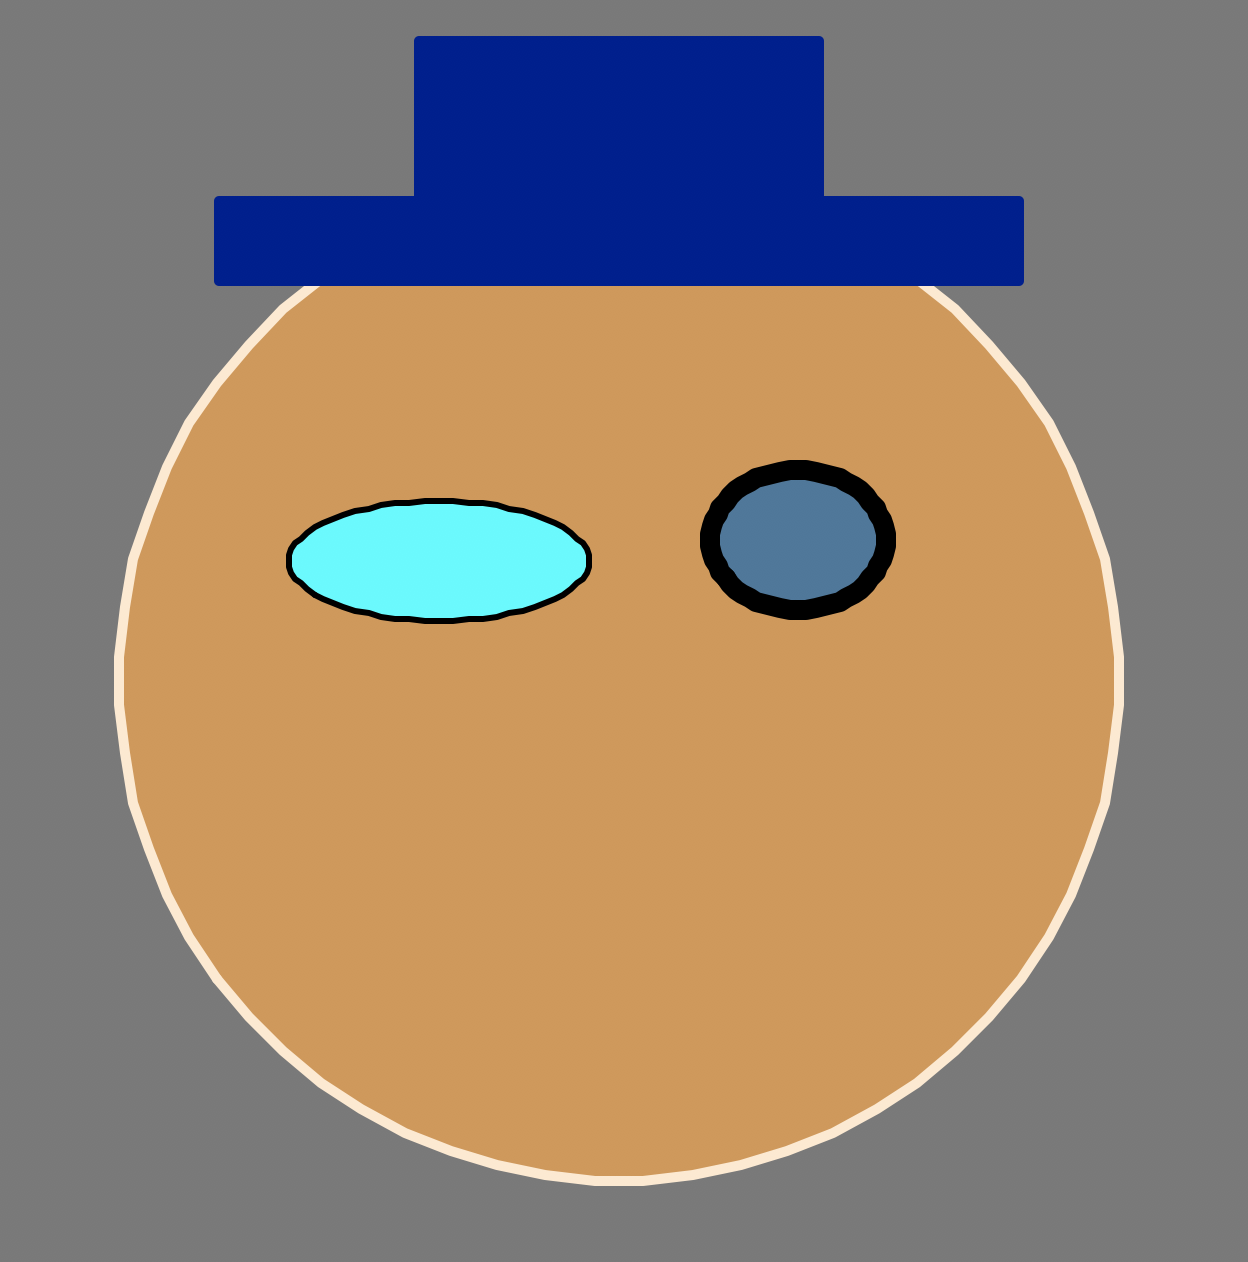 Smiley Hat: The same face with a hat on top composed of two rectangles: a long thin one and a shorter thicker one that overlaps the thin one above it in the middle.